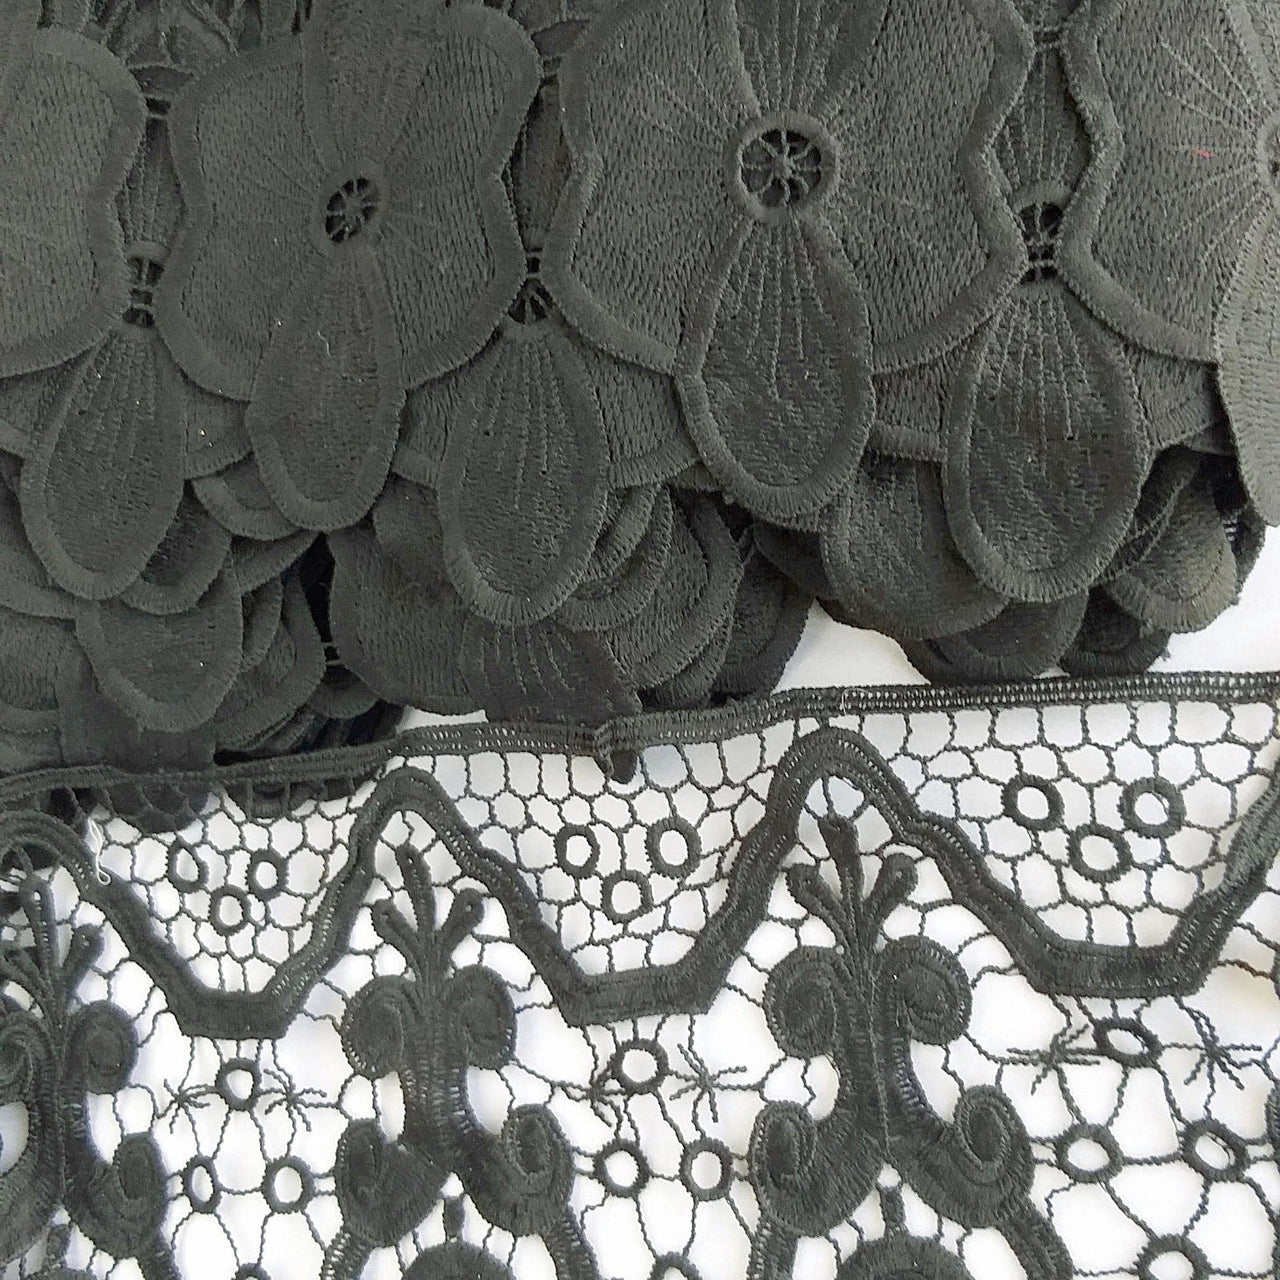 Black Floral Embroidery Crochet (Cotton) One Yard Lace Trims, Indian Laces, Indian Trims